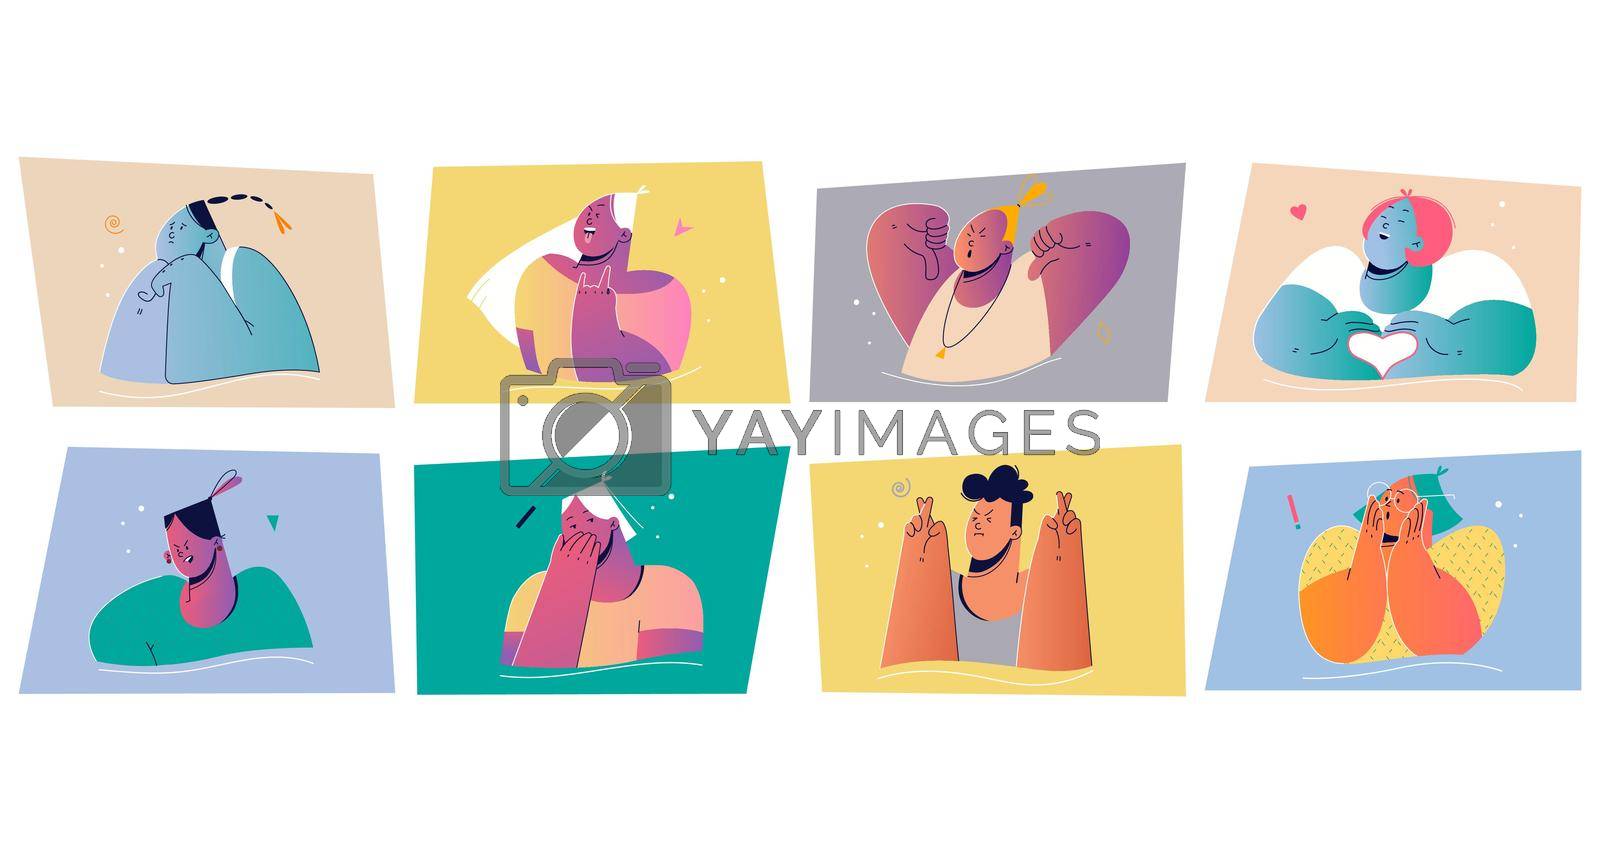 Emotion, face expression set concept. Positive and negative emotional people illustration for print. Collection of men women characters crossing fingers for luck showing dislike sign heart symbol.